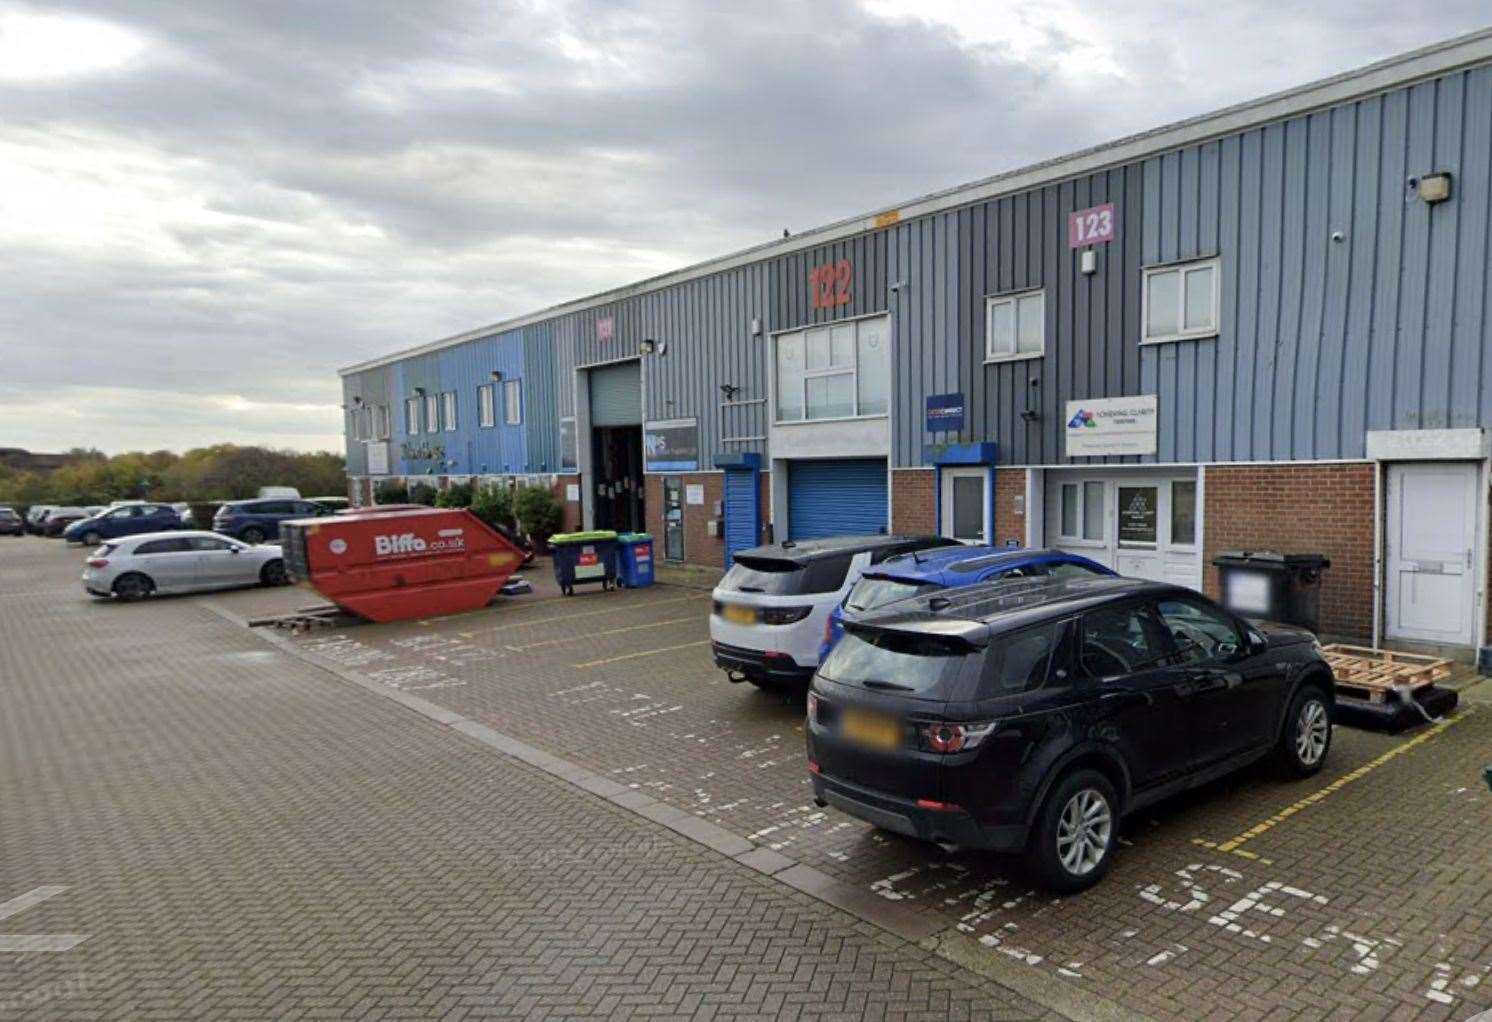 The incident took place at John Wilson Business Park in Whitstable. Photo: Google Maps